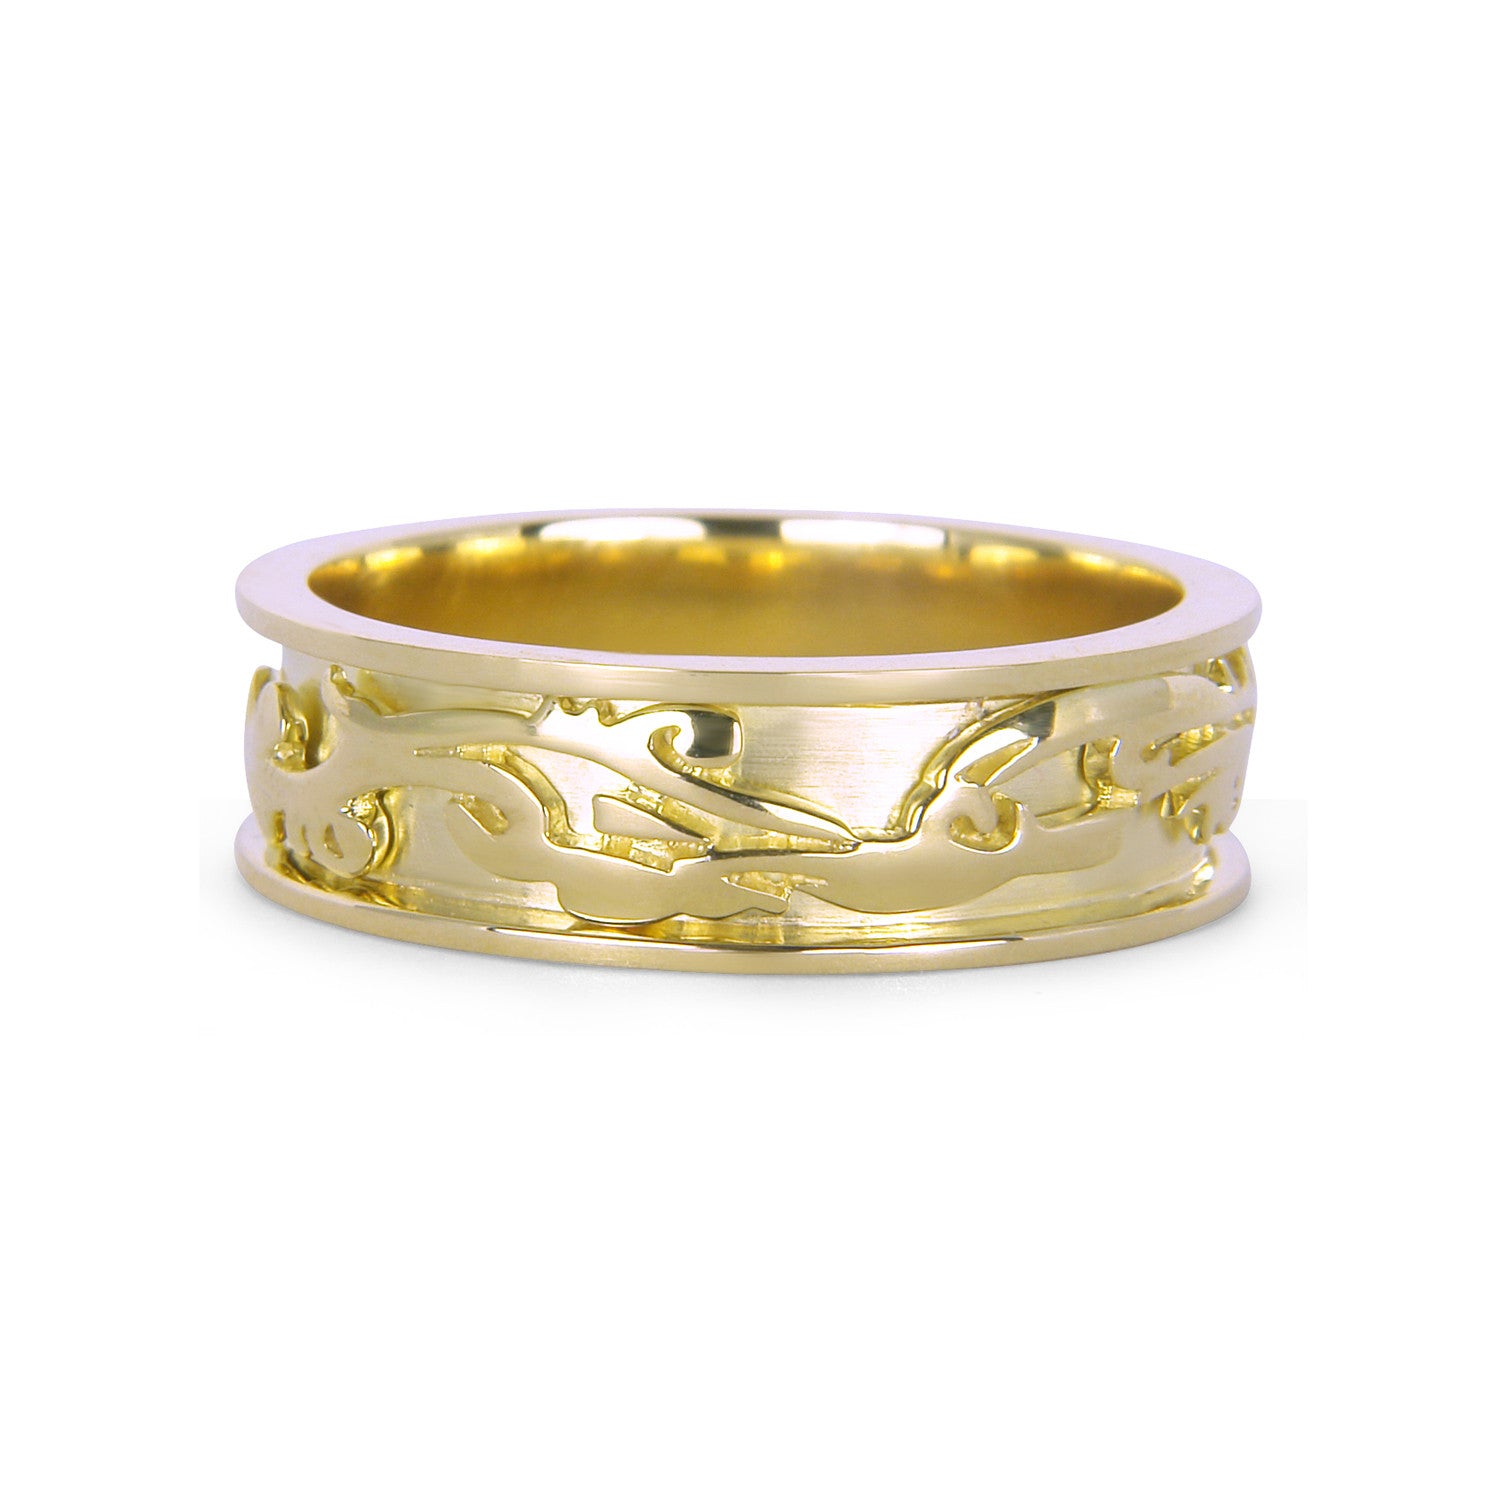 Bespoke Richard wedding ring - 18ct yellow old and unique dragon pattern